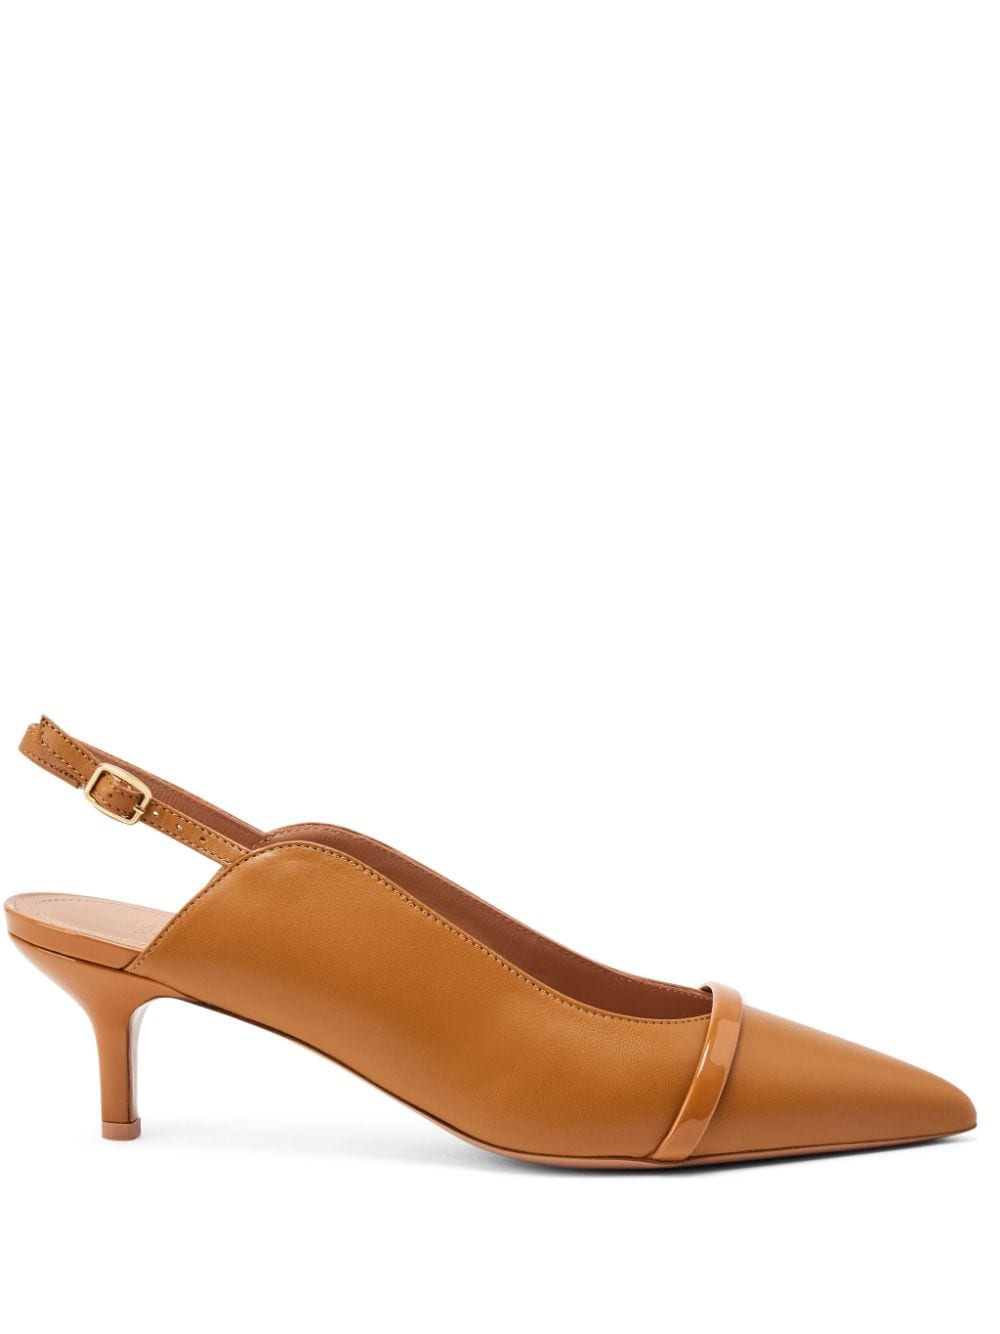 Malone Souliers Marion Slingback-Pumps - Braun von Malone Souliers